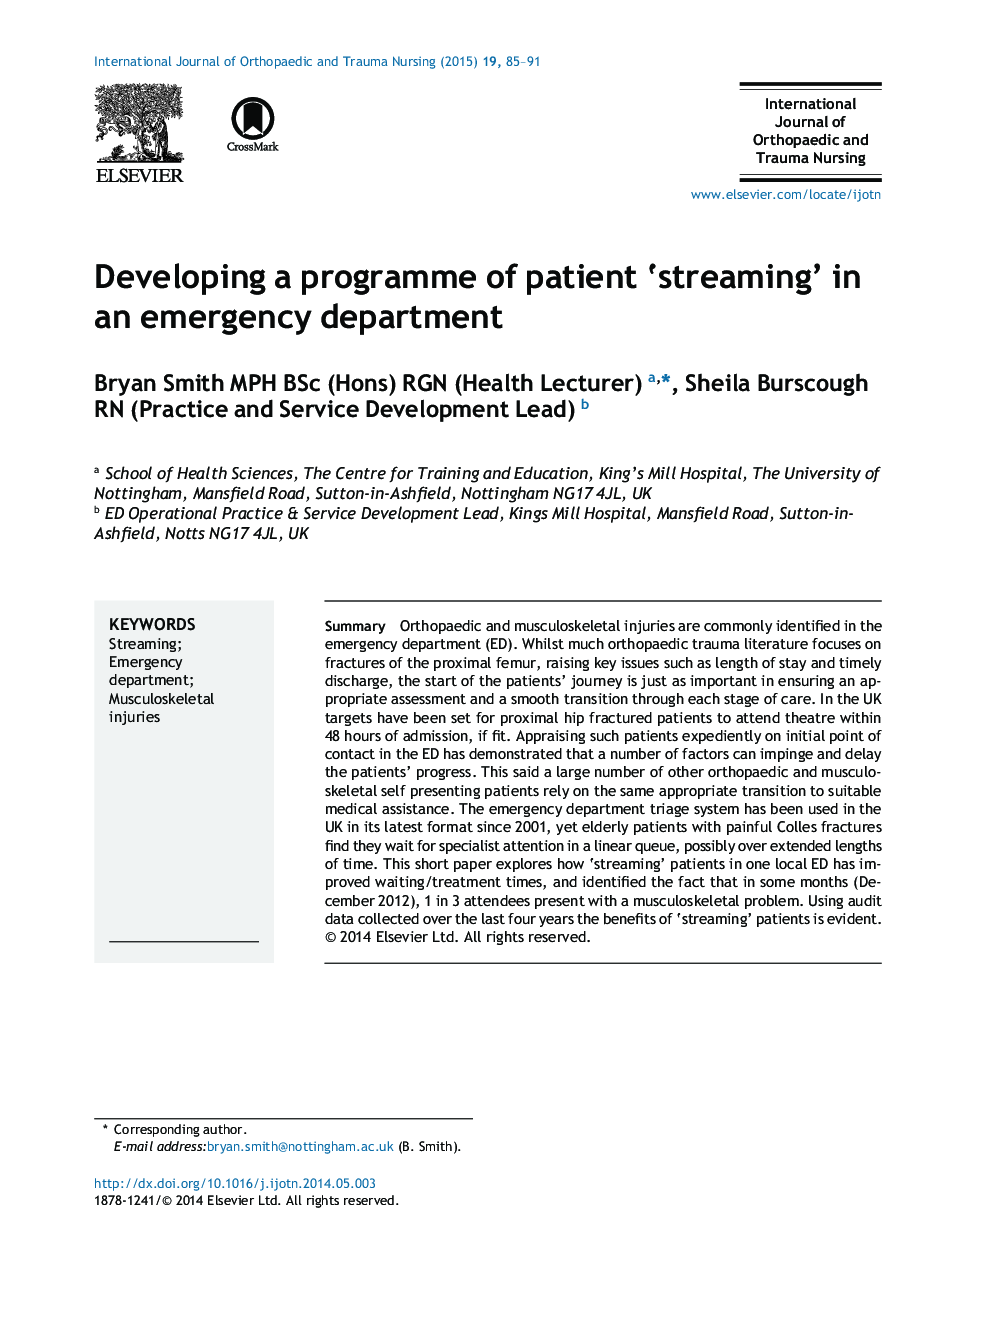 Developing a programme of patient ‘streaming’ in an emergency department